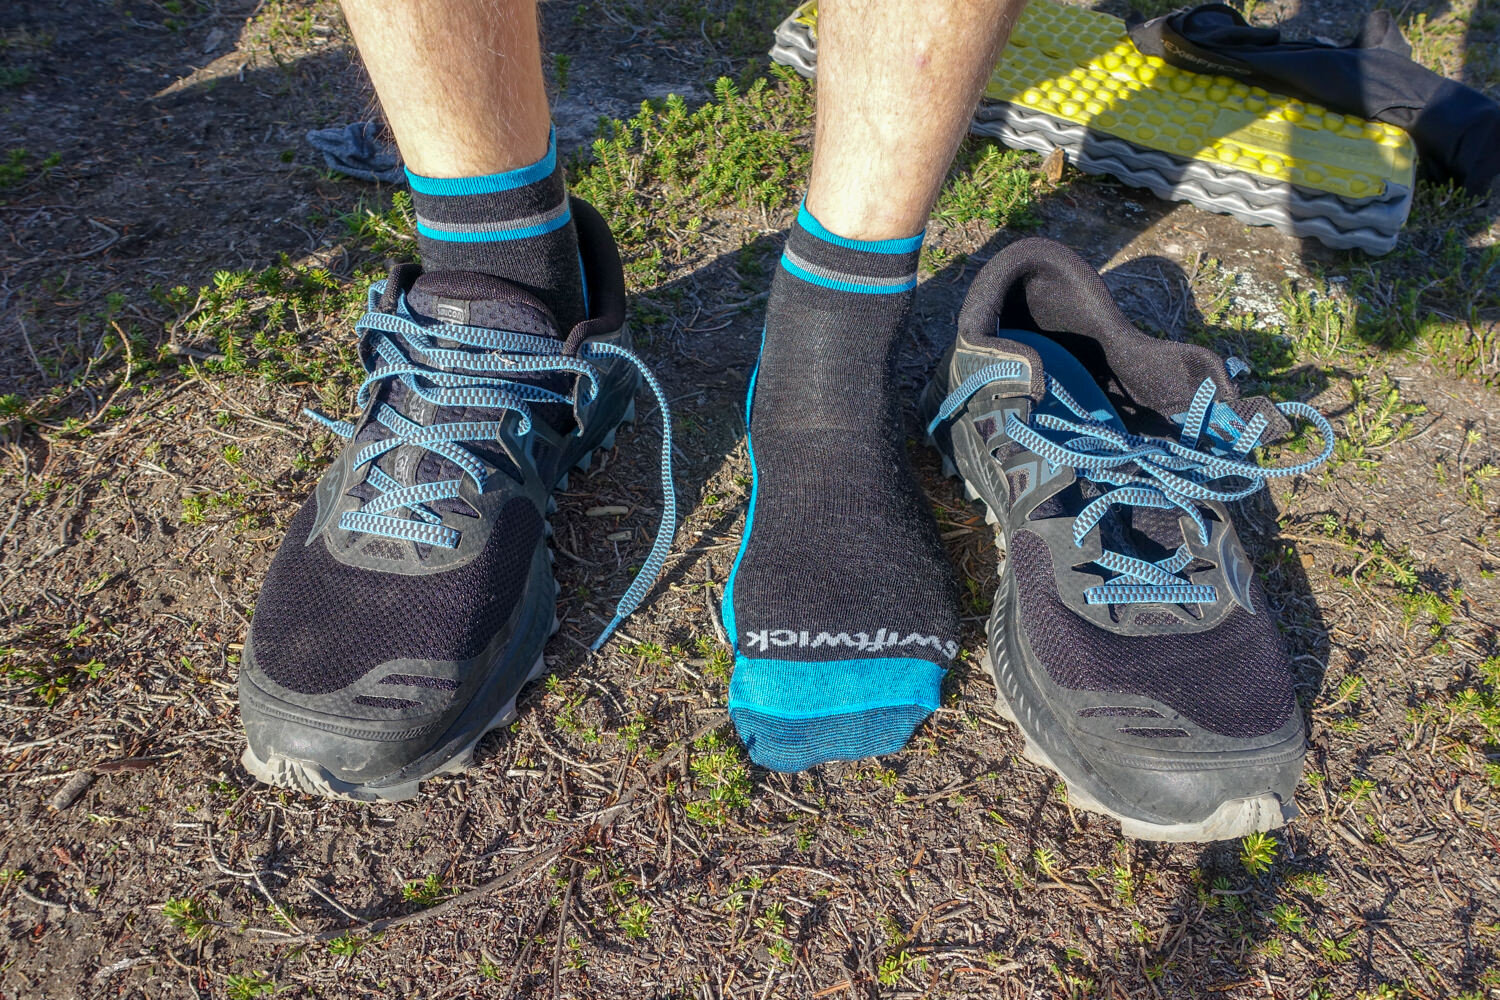 The Swiftwick PuRsuit Hike Two are some of our favorite socks for running